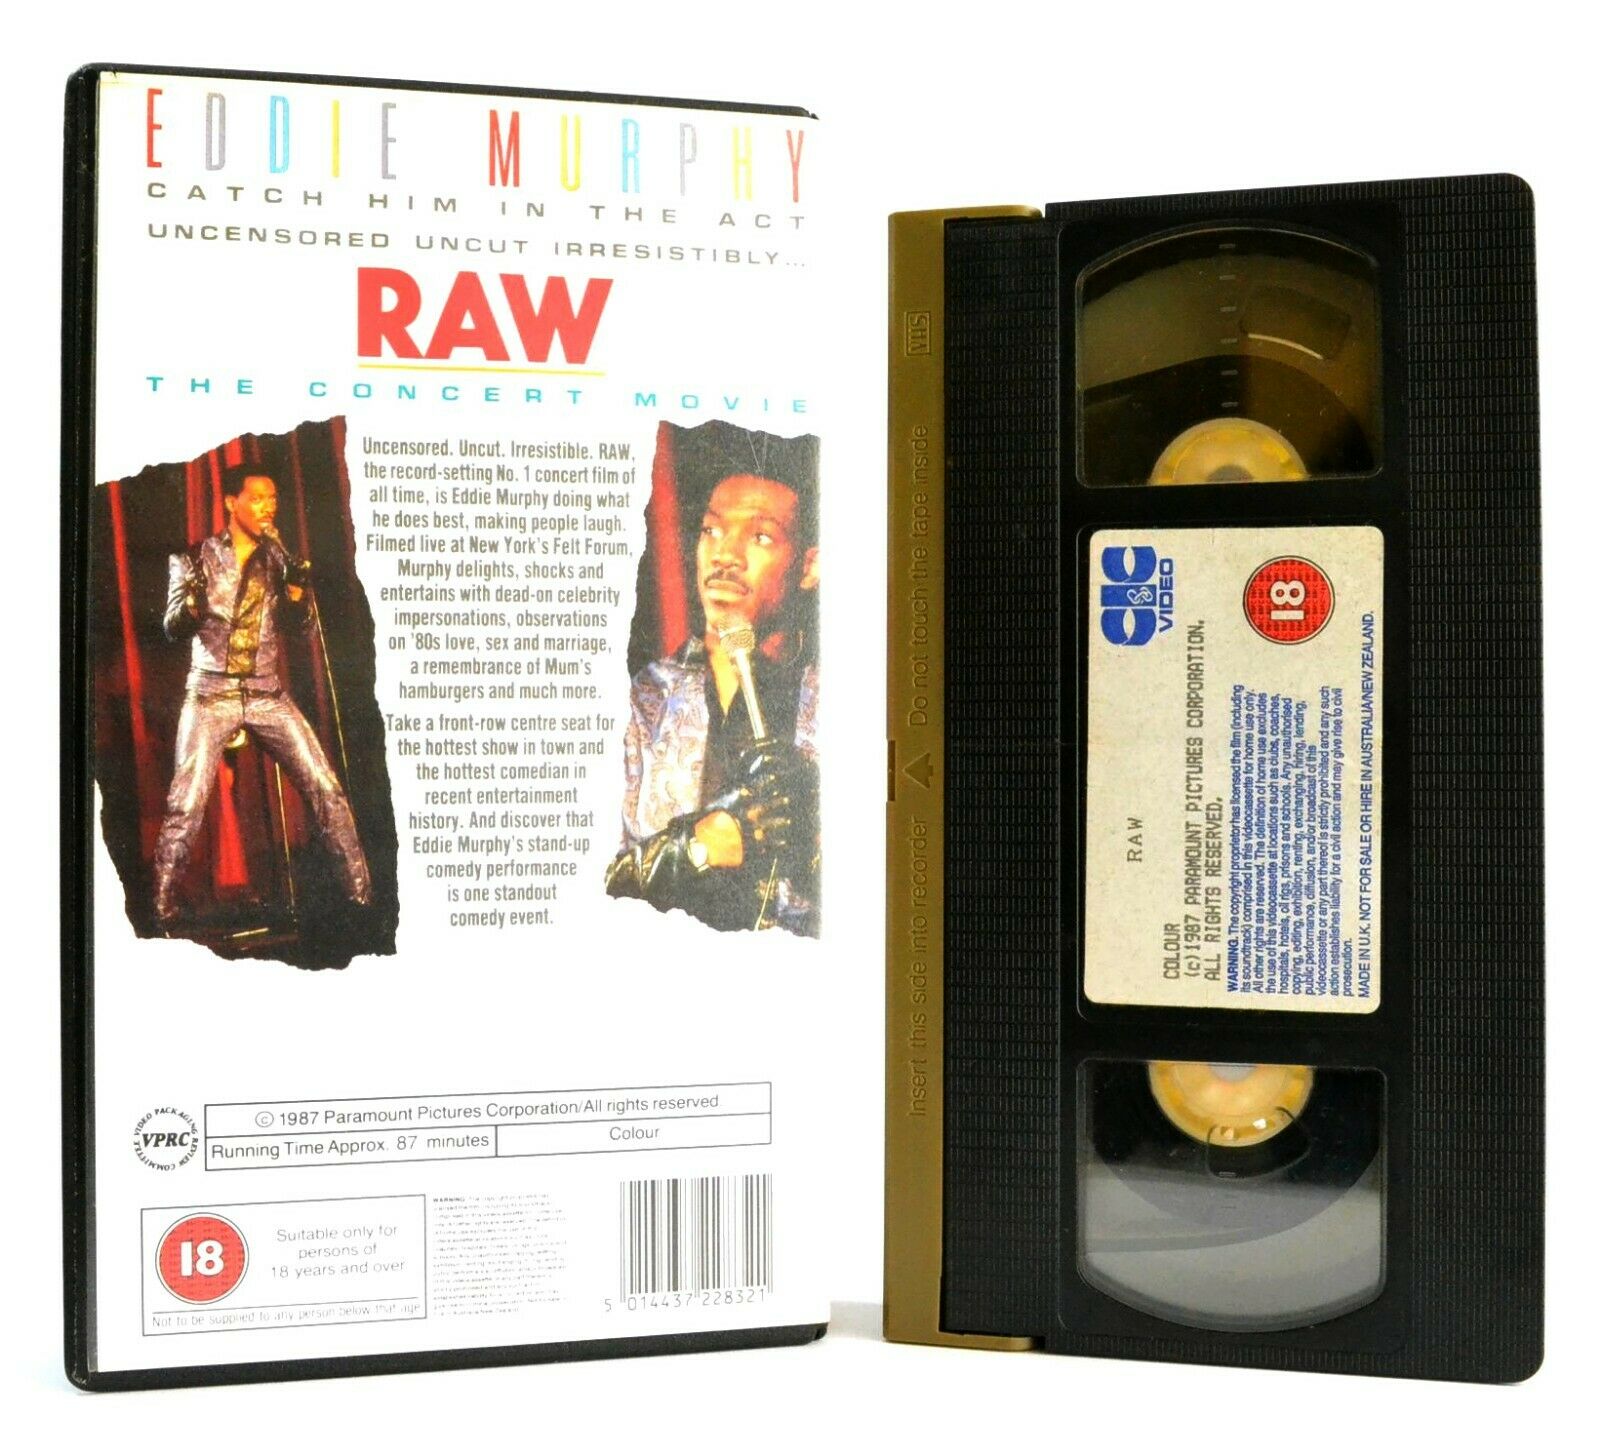 RAW:The Concert Movie - Stand Up Comedy - New York's Felt Forum - E.Murphy - VHS-